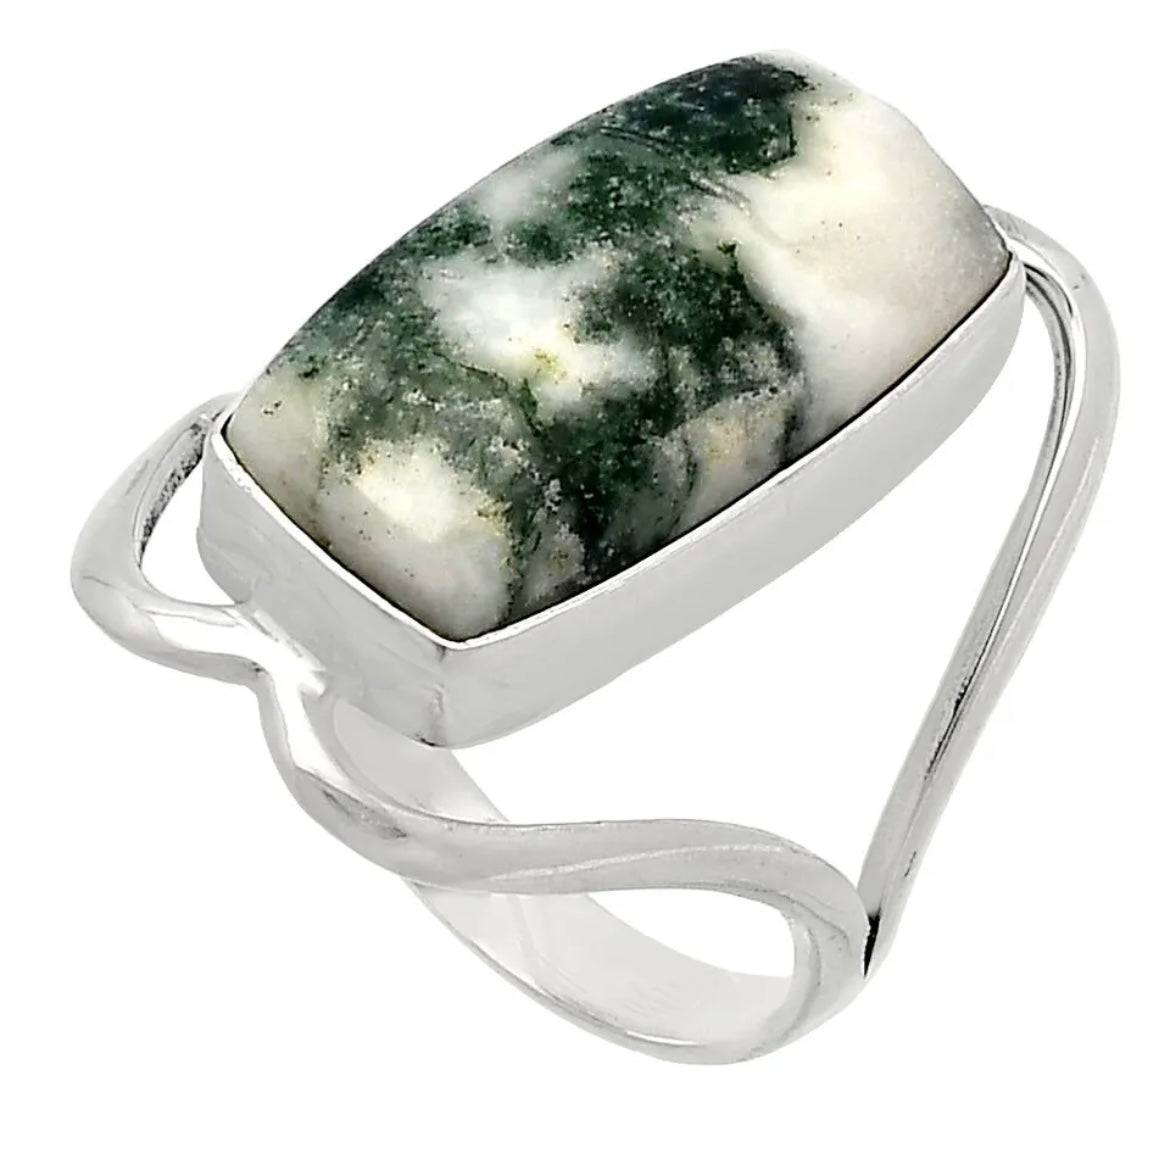 Moss Agate Sterling Silver Rectangular Ring - Keja Designs Jewelry